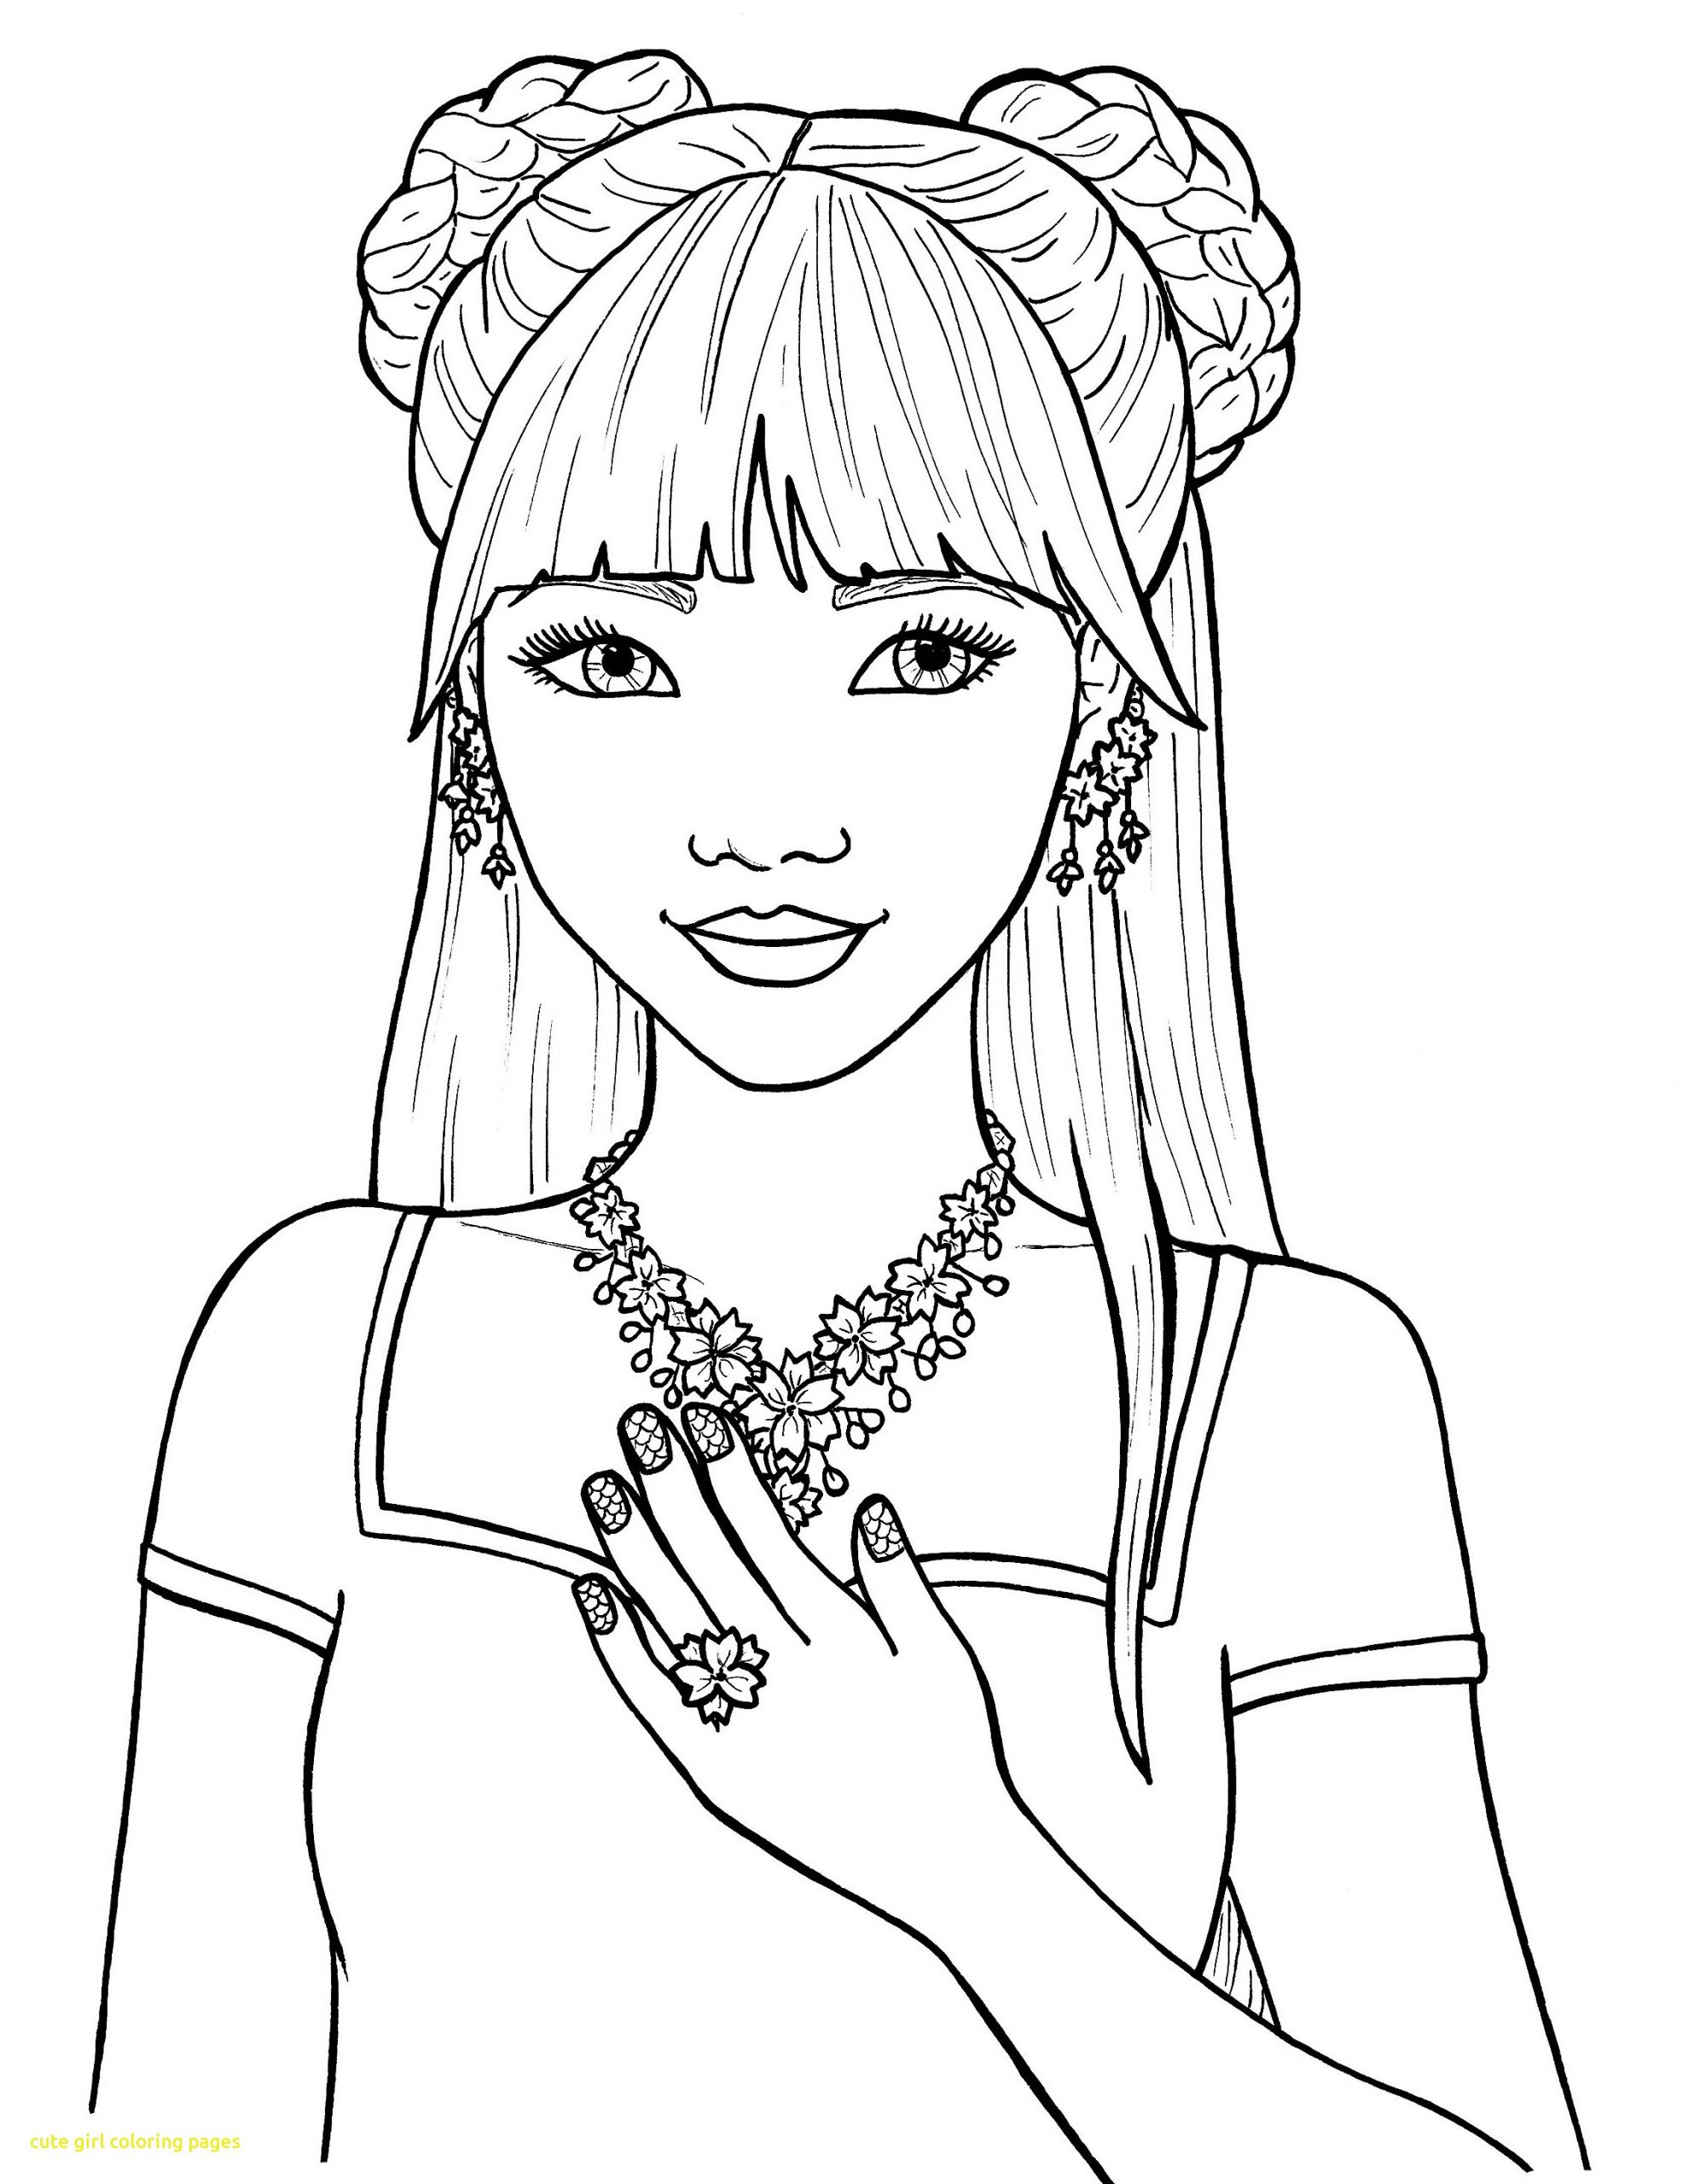 Coloring For Girls Free Awesome To Year Coloring Pages For 20 Year ...